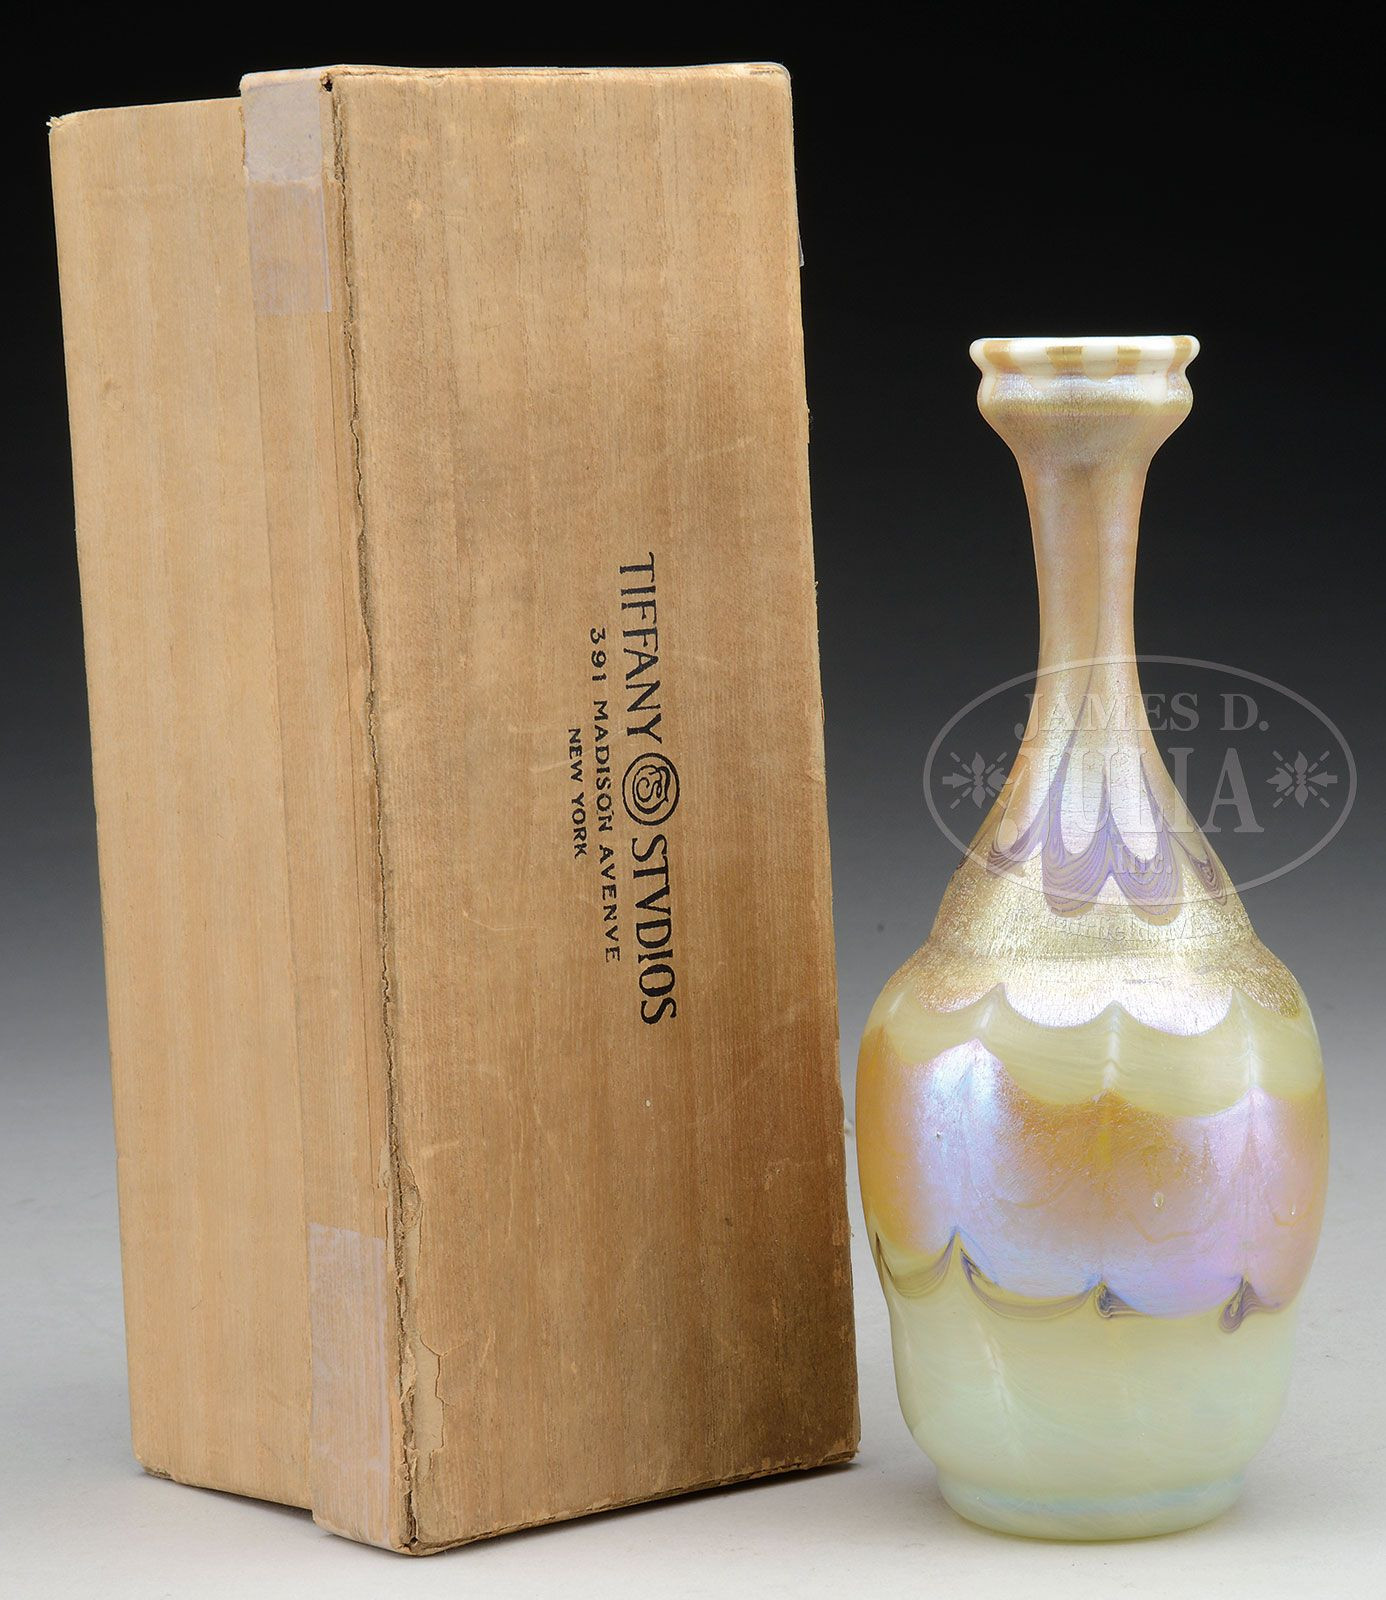 amber colored glass vases of tiffany favrile glass decorated vase tiffany favrile vase has with regard to tiffany favrile glass decorated vase tiffany favrile vase has opaque cream colored glass body shading